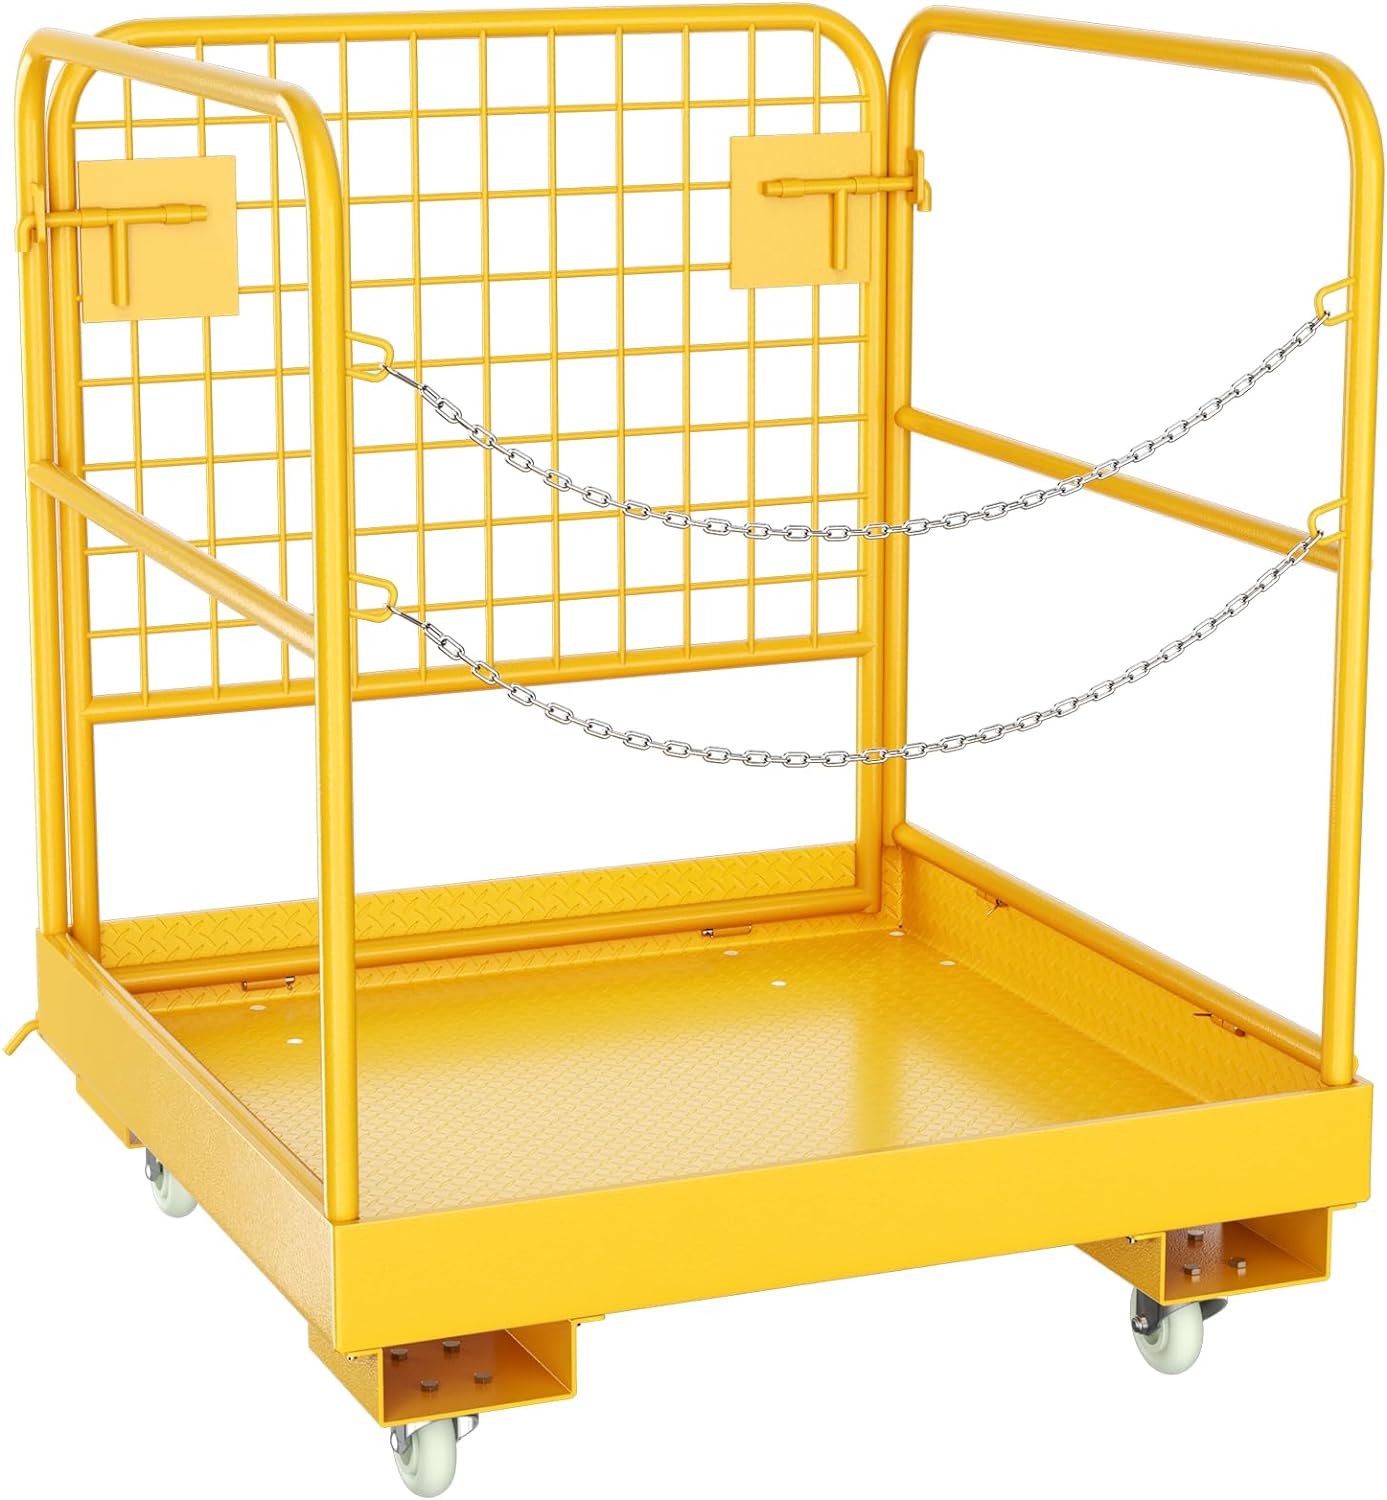 Forklift Safety Cage Forklift Man Basket 36'' x 36'' Foldable Forklift Work Platform for 1-2 People with Double-Chain Guardrail & Drain Hole Aerial Work 1200lbs Capacity